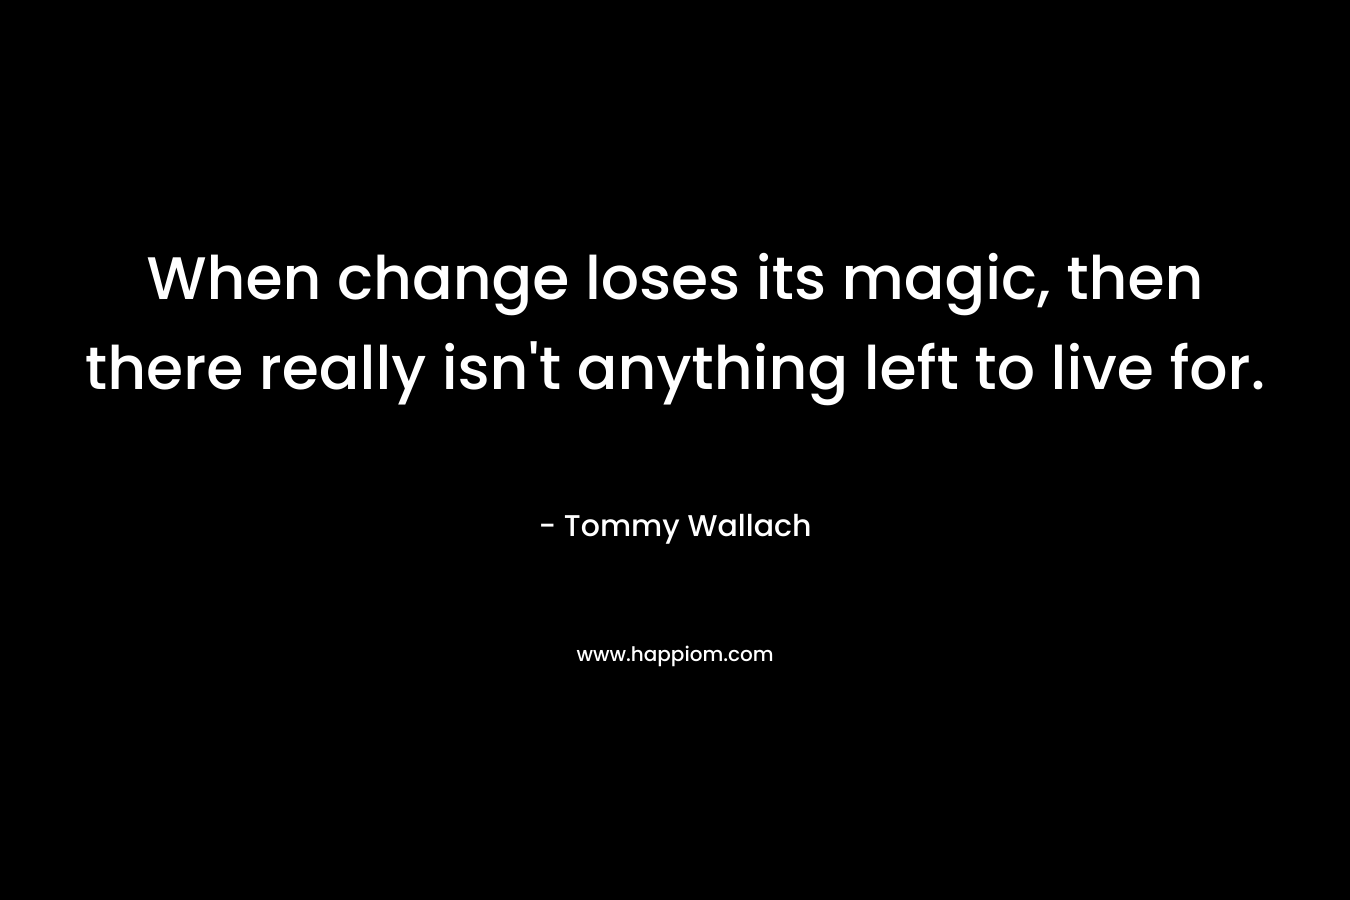 When change loses its magic, then there really isn't anything left to live for.